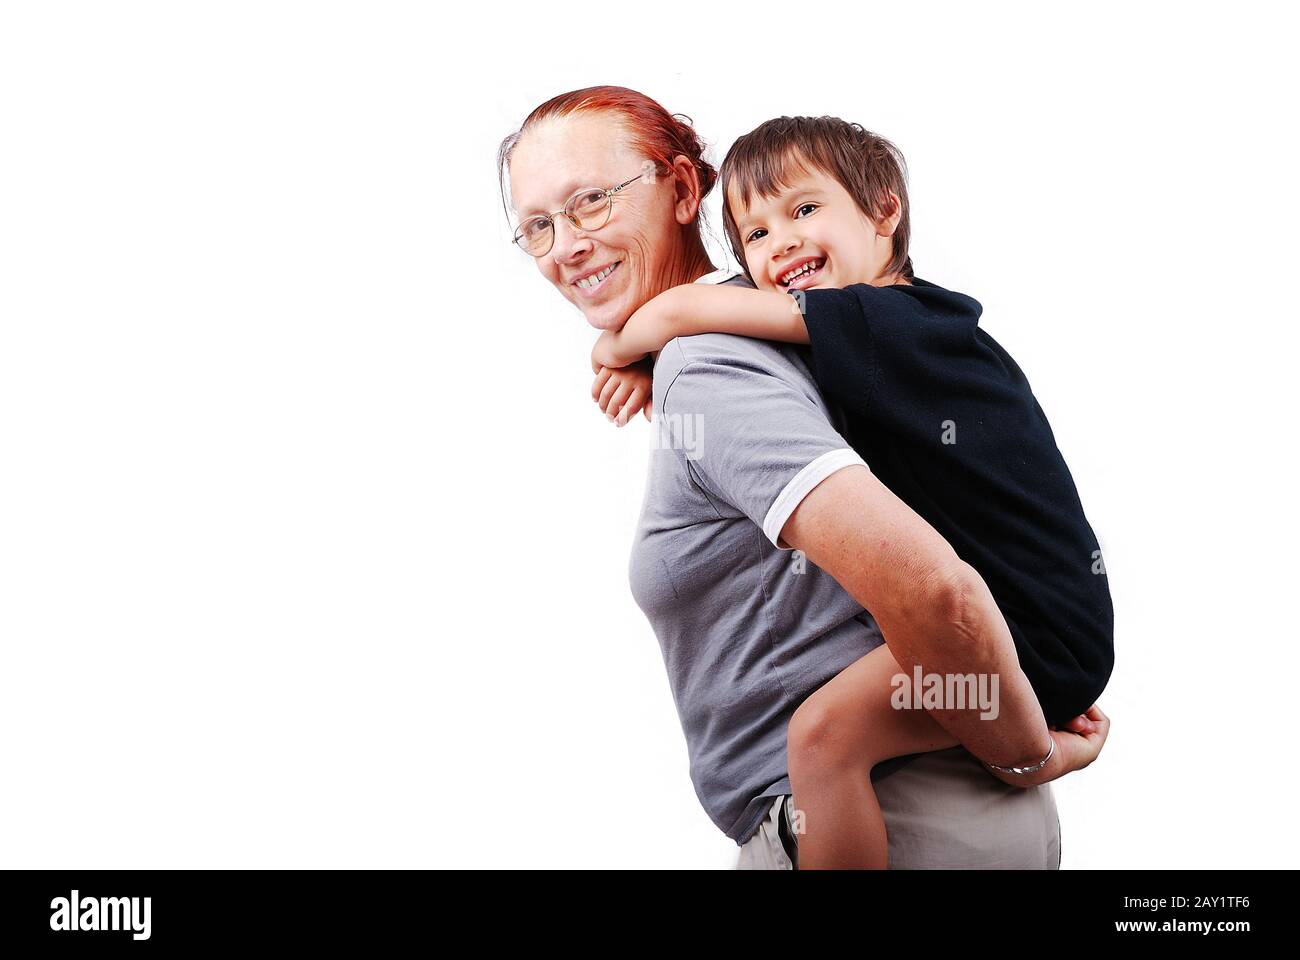 Middle aged woman holding little boy on her back Stock Photo